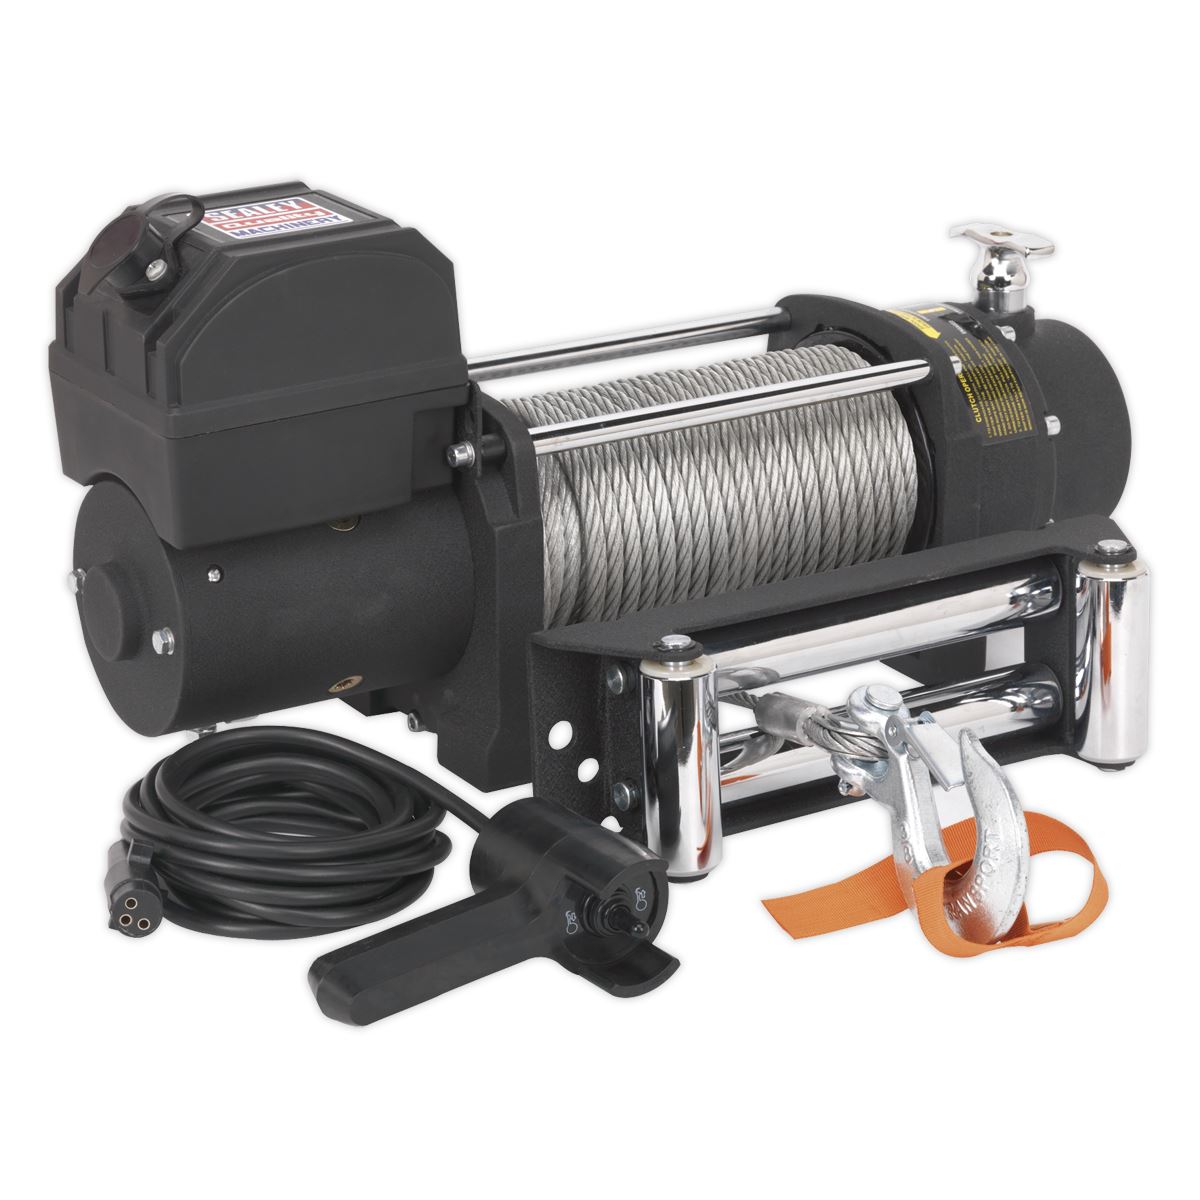 Sealey Premier Self-Recovery Winch 4300kg (9500lb) Line Pull 12V